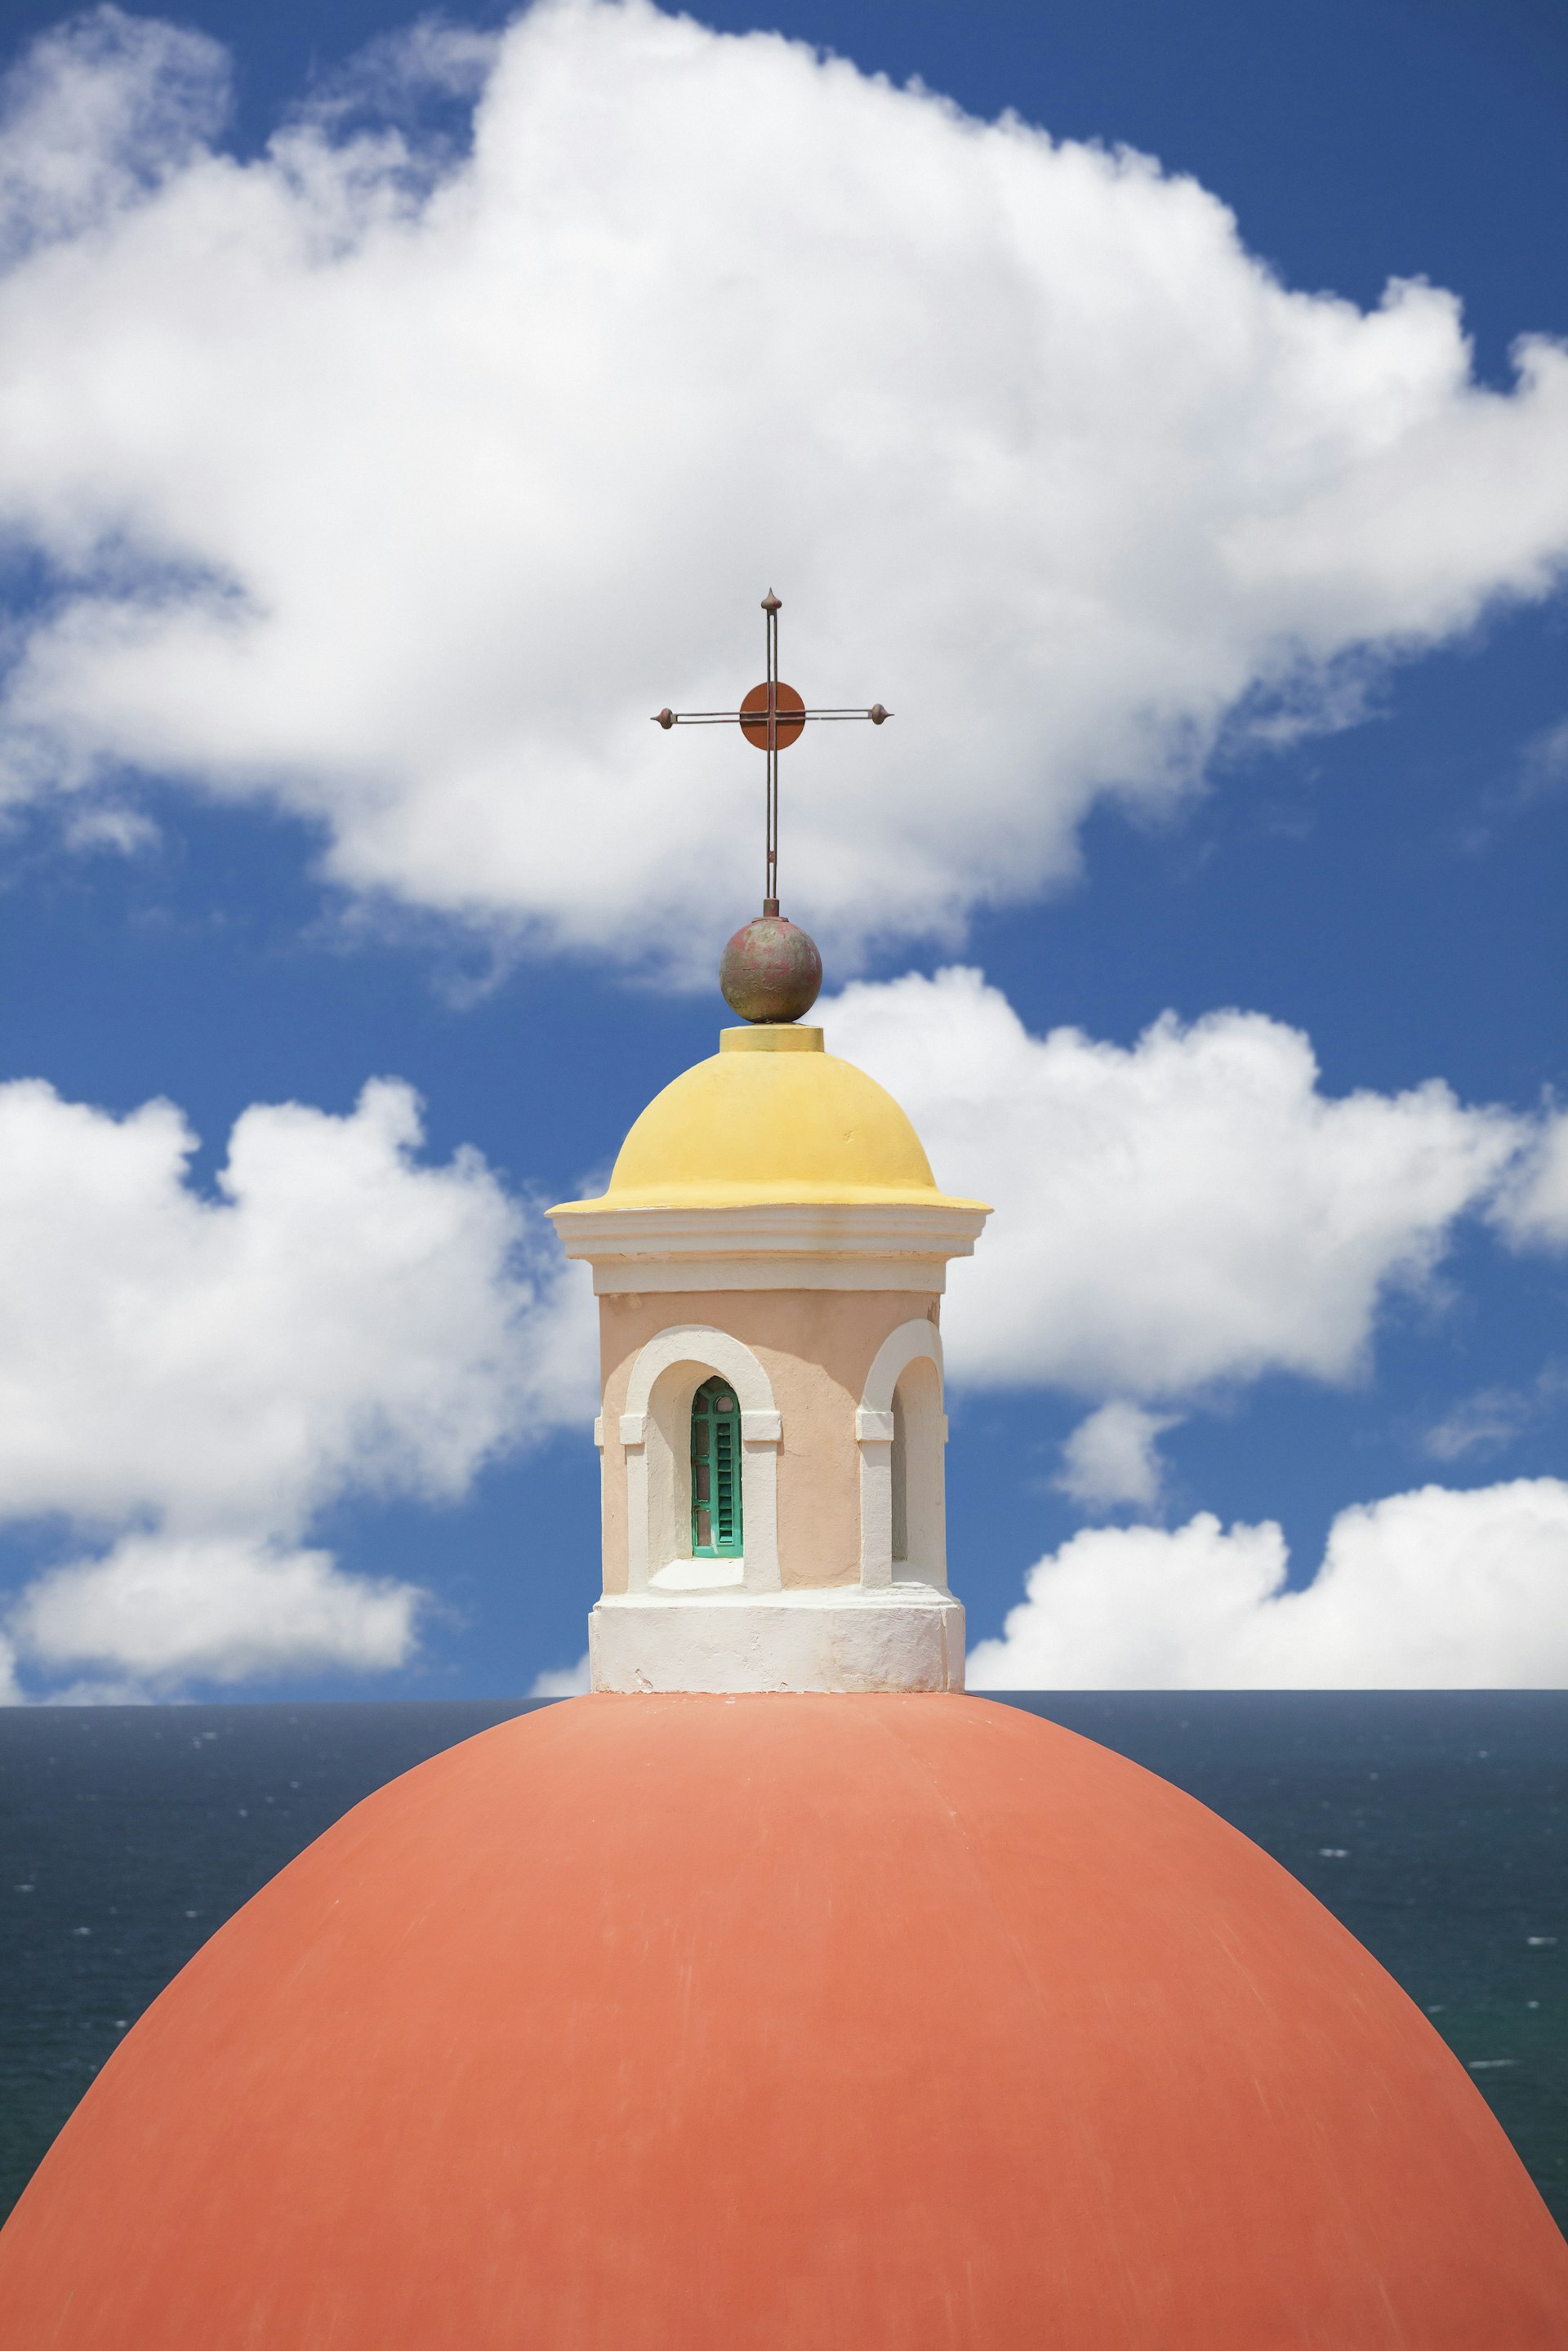 The peach-colored dome of cathedral with puffy clouds in a blue sky in San Juan Puerto Rico